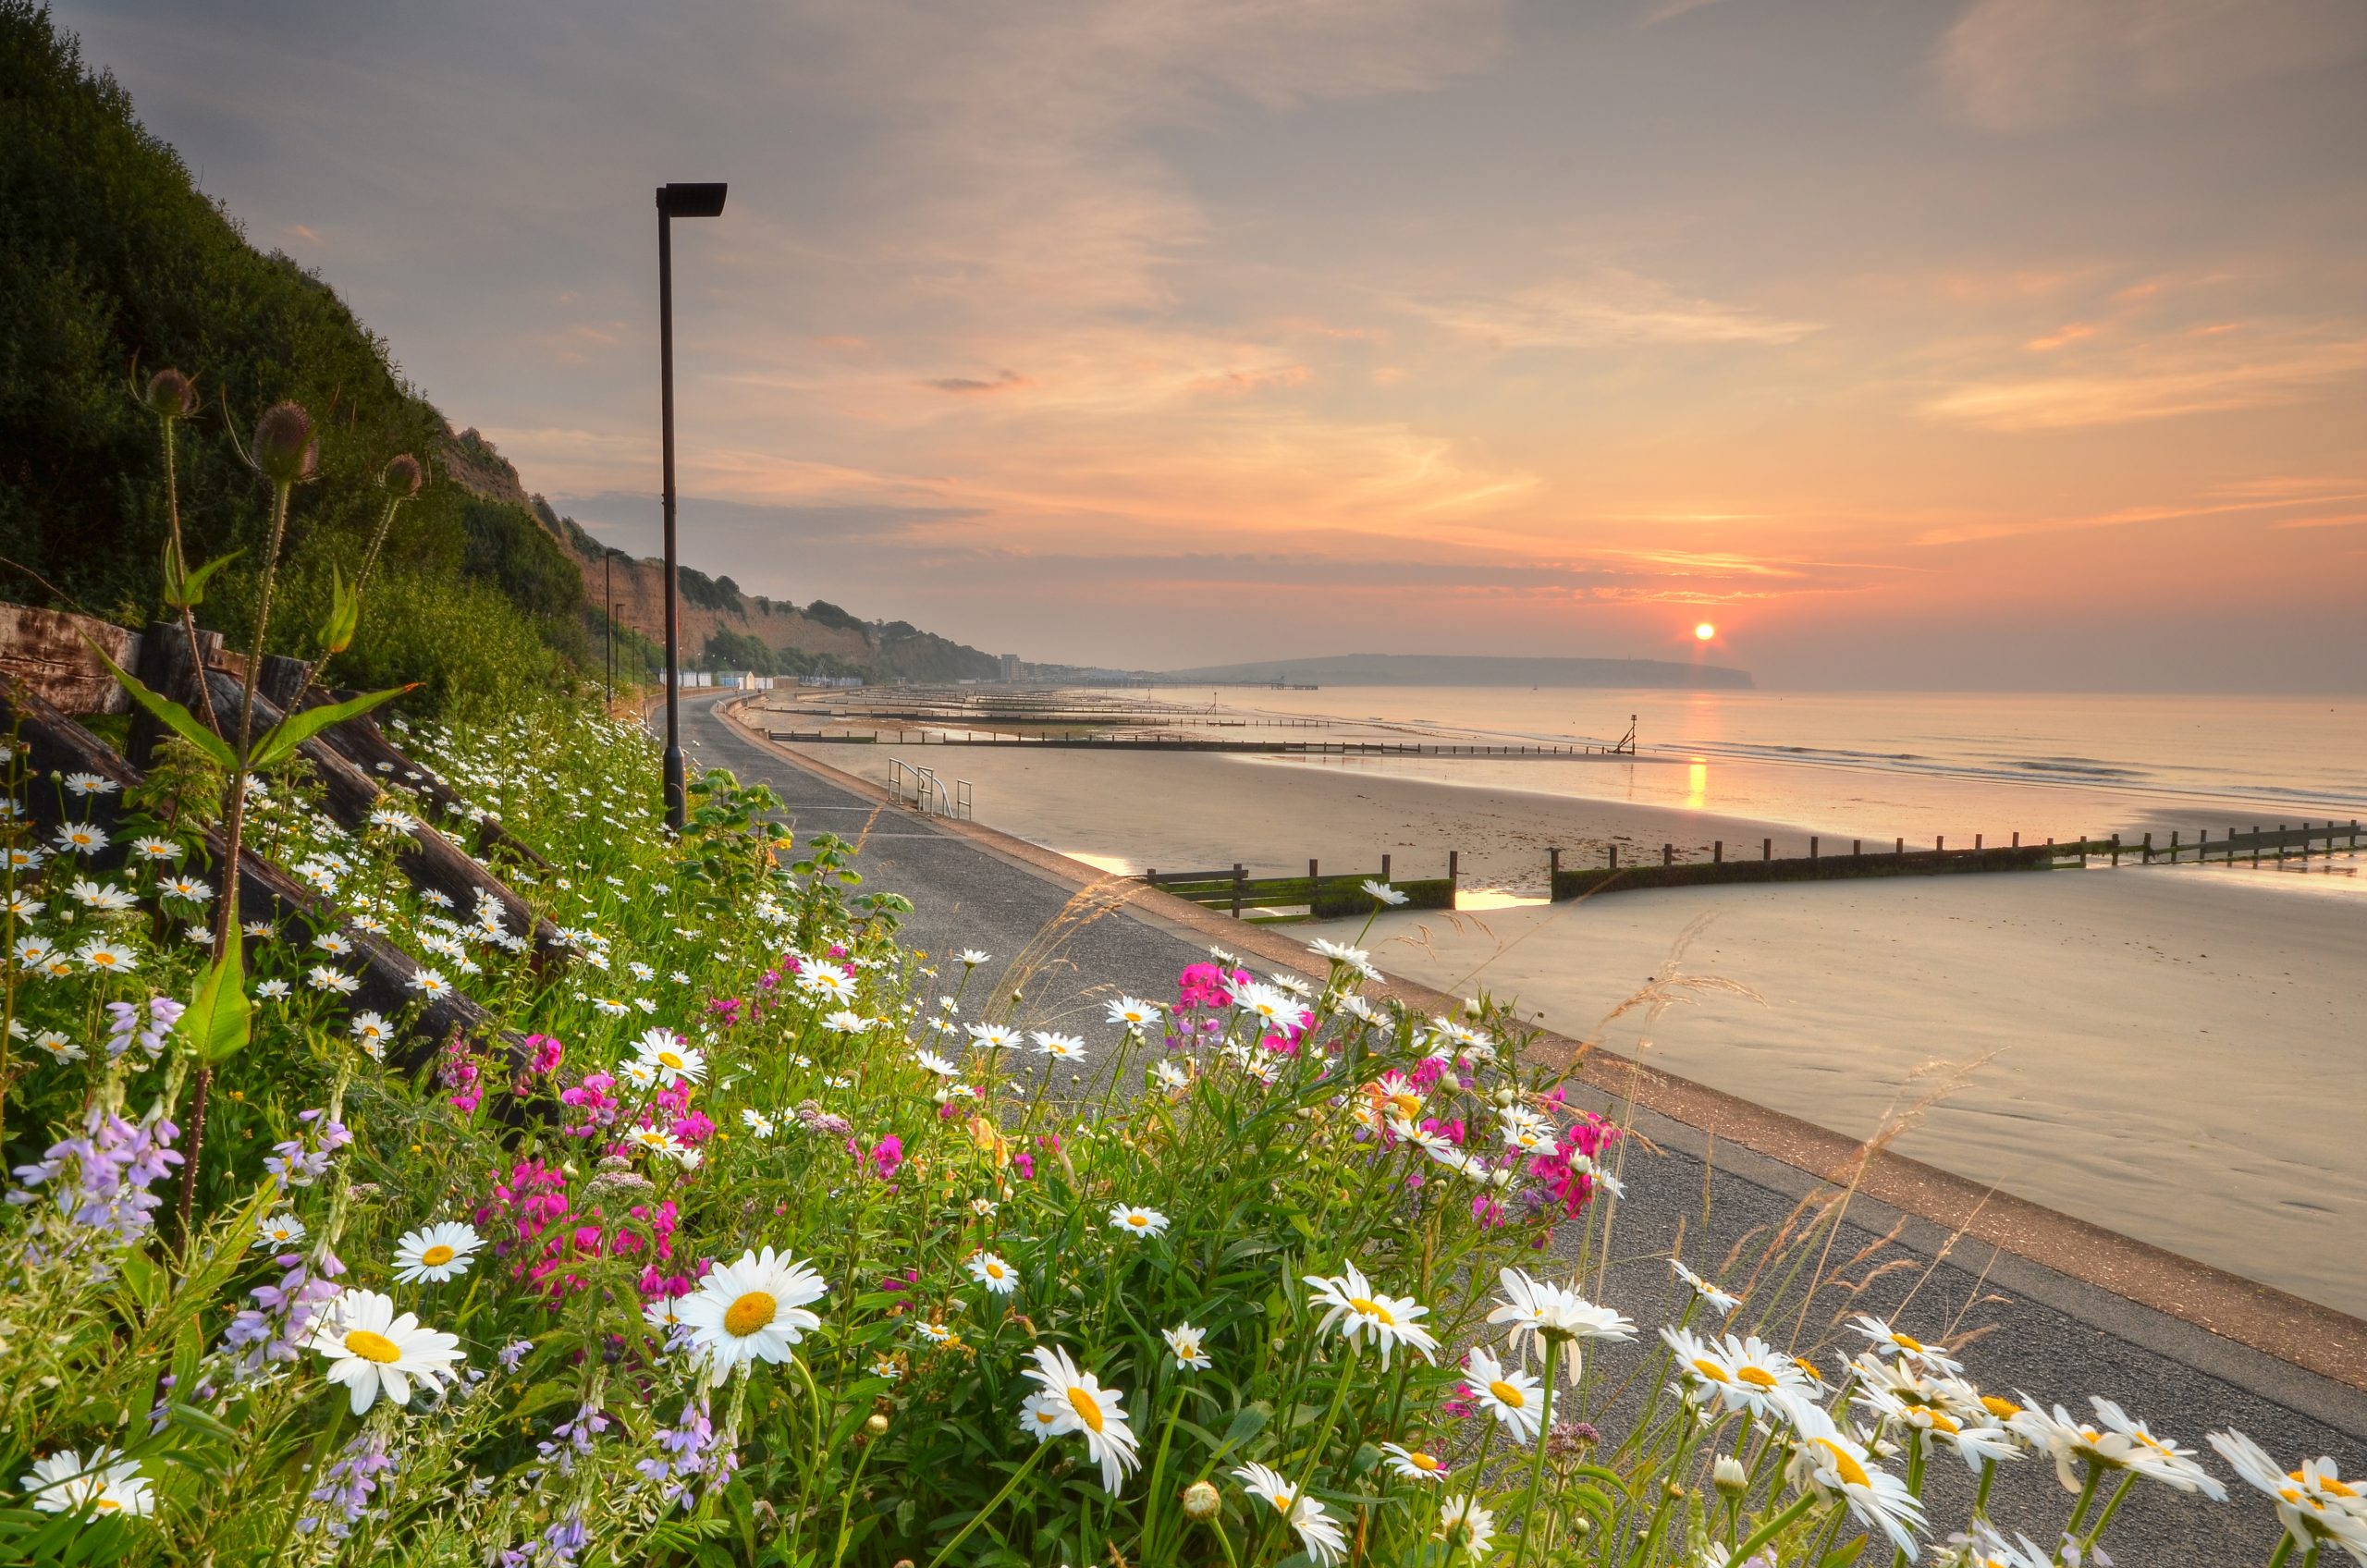 Spring flowers on a hillside with a beach and sunset in the background, on the Isle of Wight